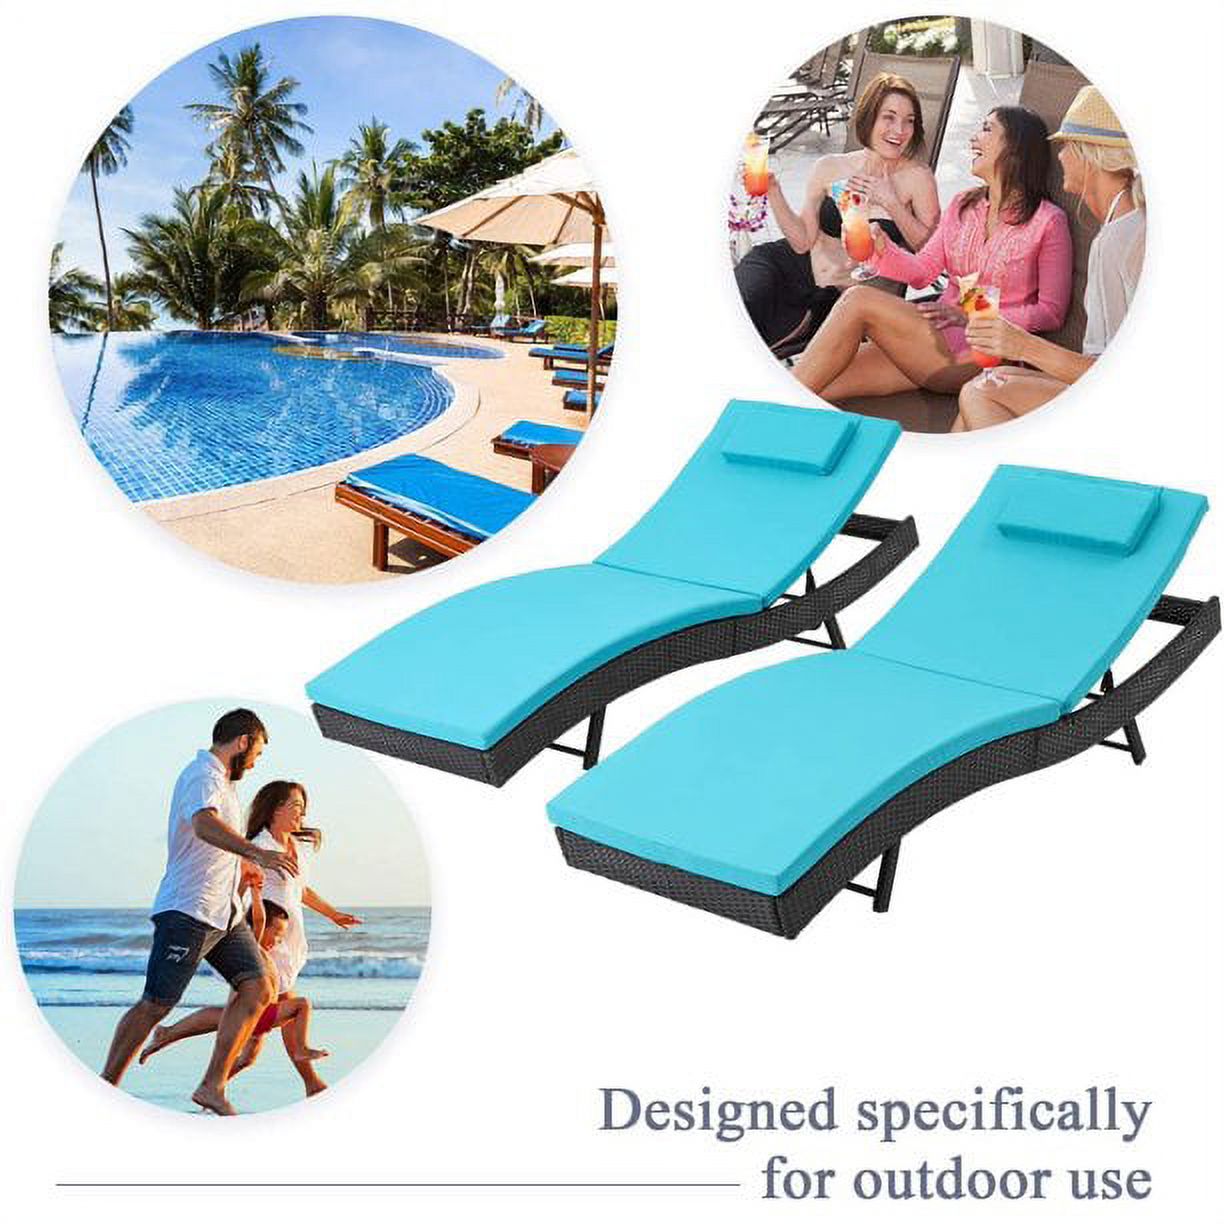 SOLAURA Patio Chaise Lounge Adjustable Black Wicker Reclining Chairs Set of 2 with Blue Cushions - image 2 of 6